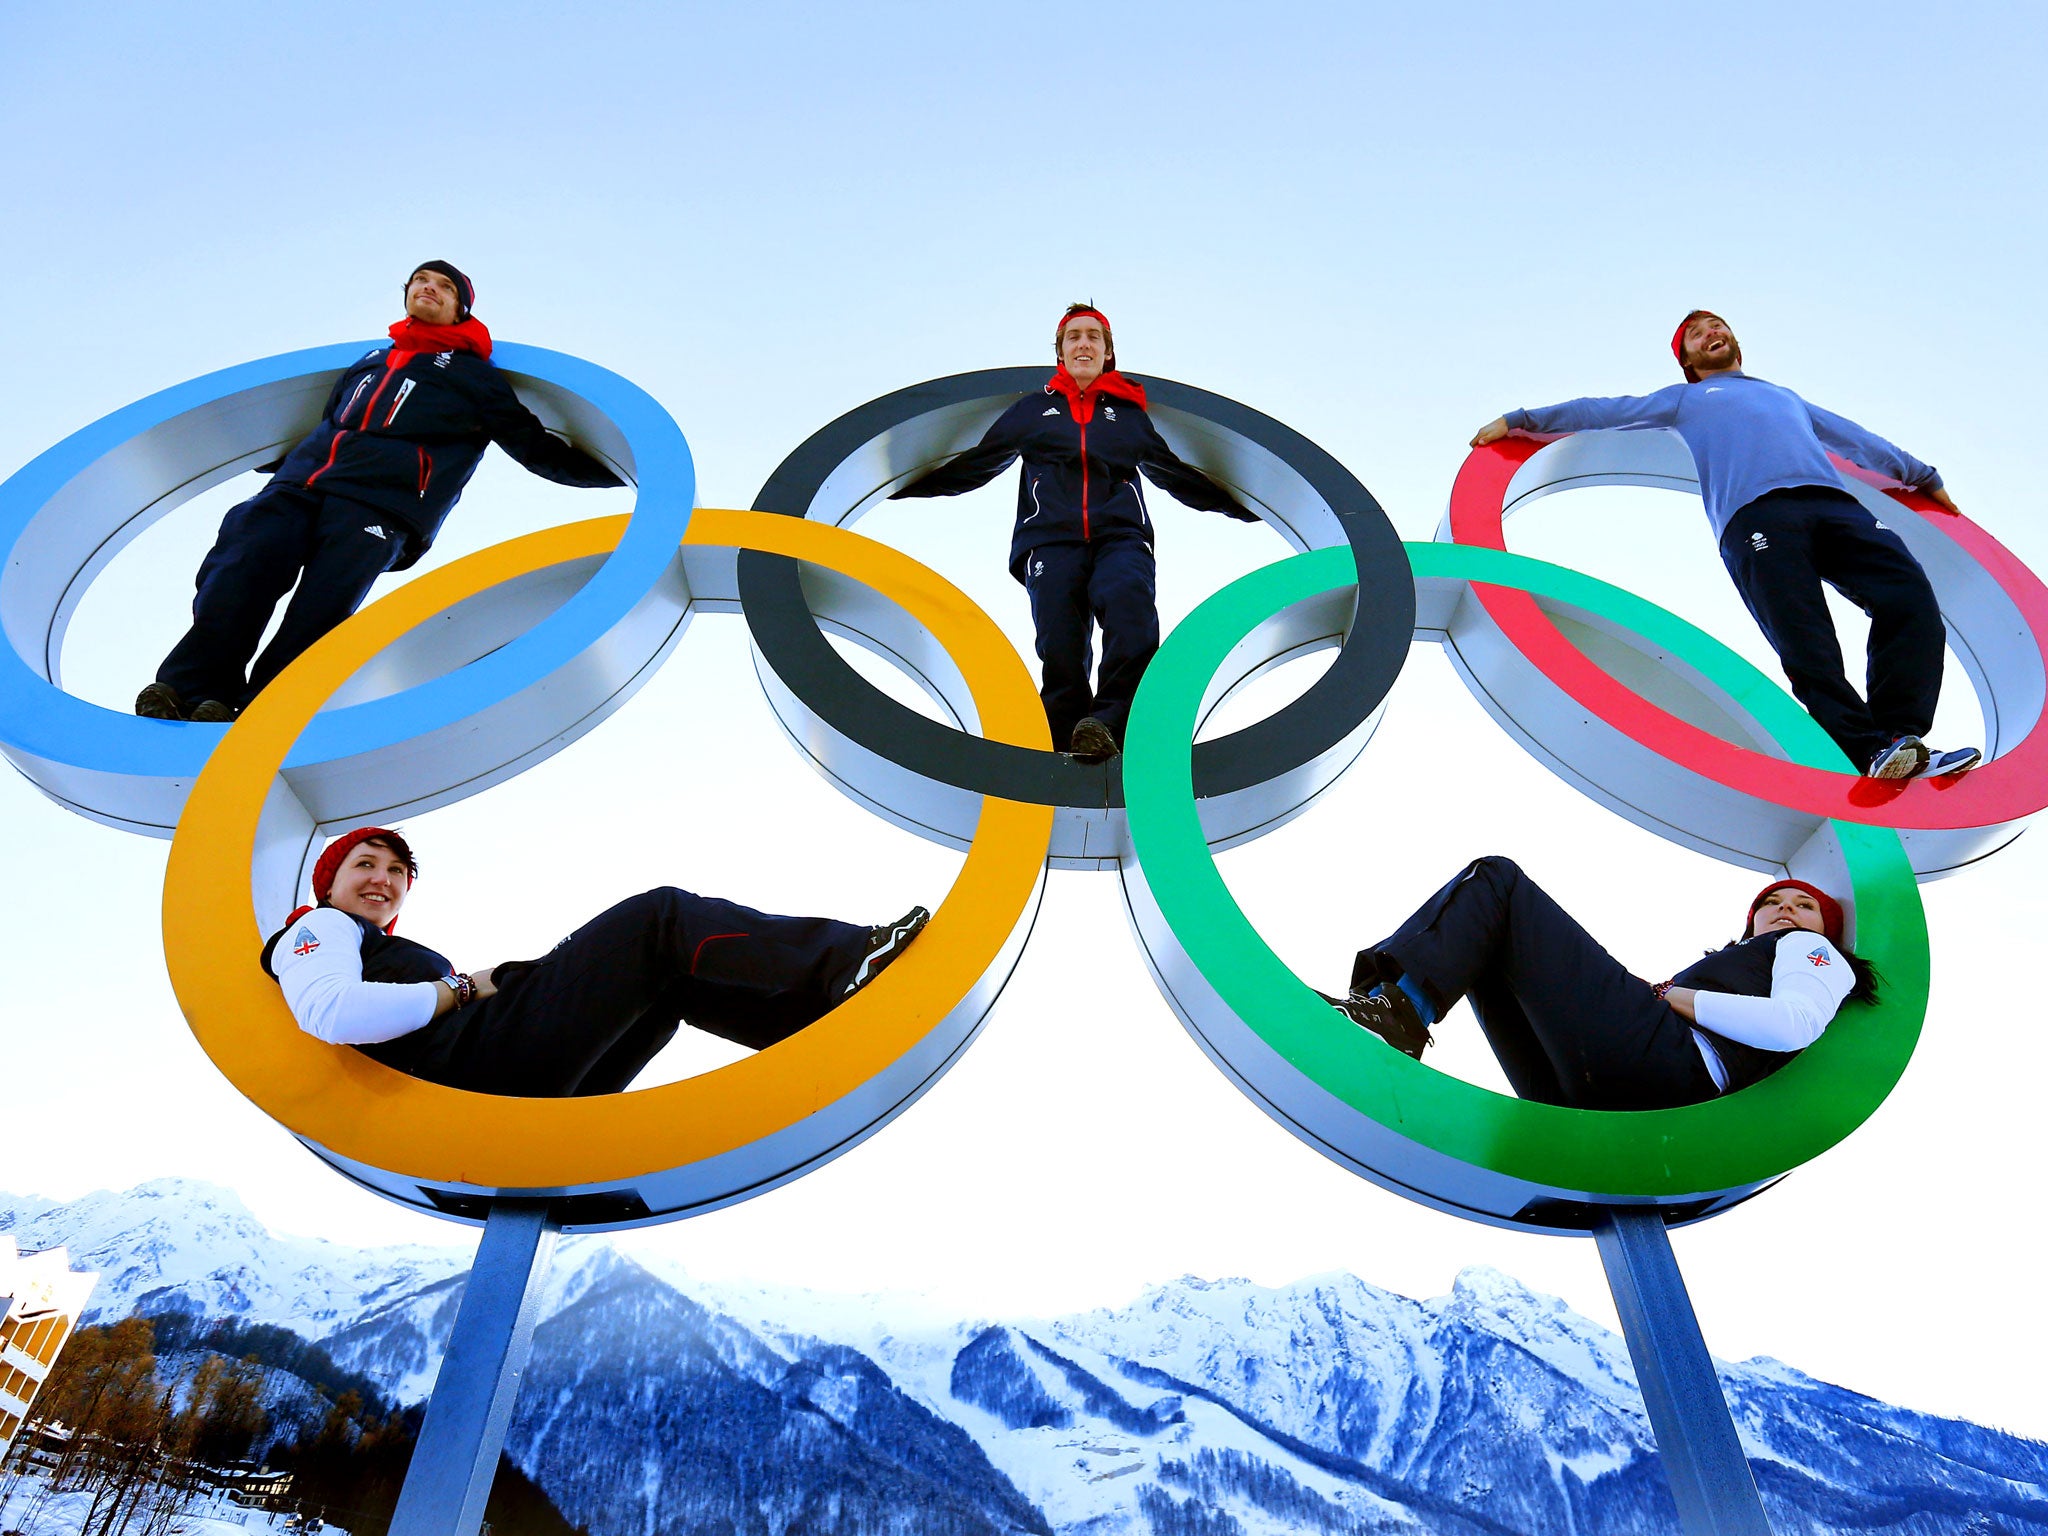 Great Britain Athletes, back row (L-R) Dom Harrington, Ben Kilner, Billy Morgan, back row (L-R) Rebekah Wilson and Paula Walker pose for a photograph in the Olympic Rings in the Athletes Village in Sochi